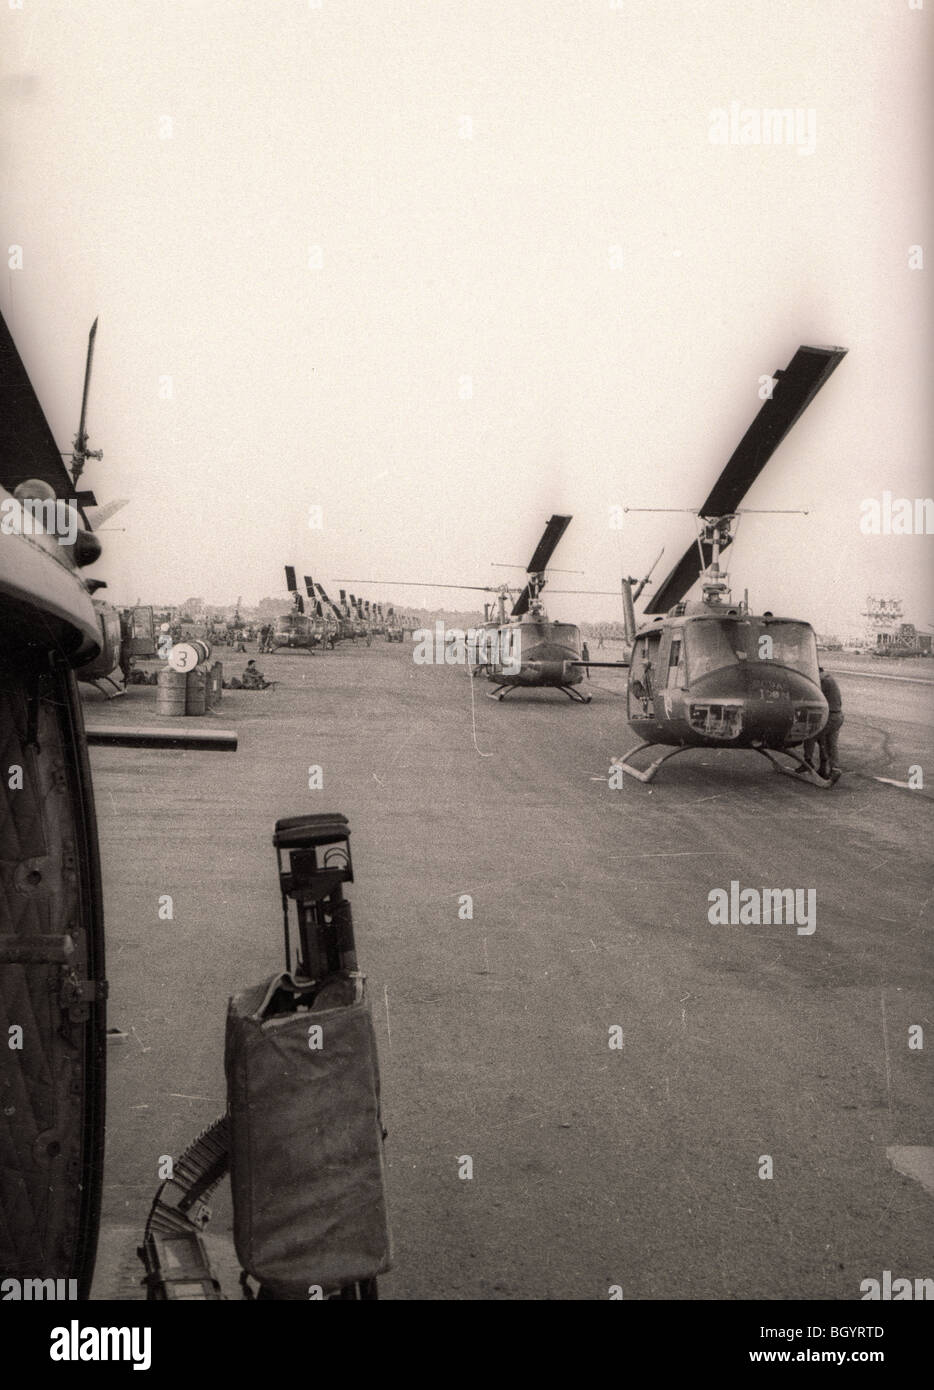 Huey helicopters of the 121st AHC out of Soc Trang, Vietnam, wait on a flight line for a mission during the Vietnam War. Stock Photo